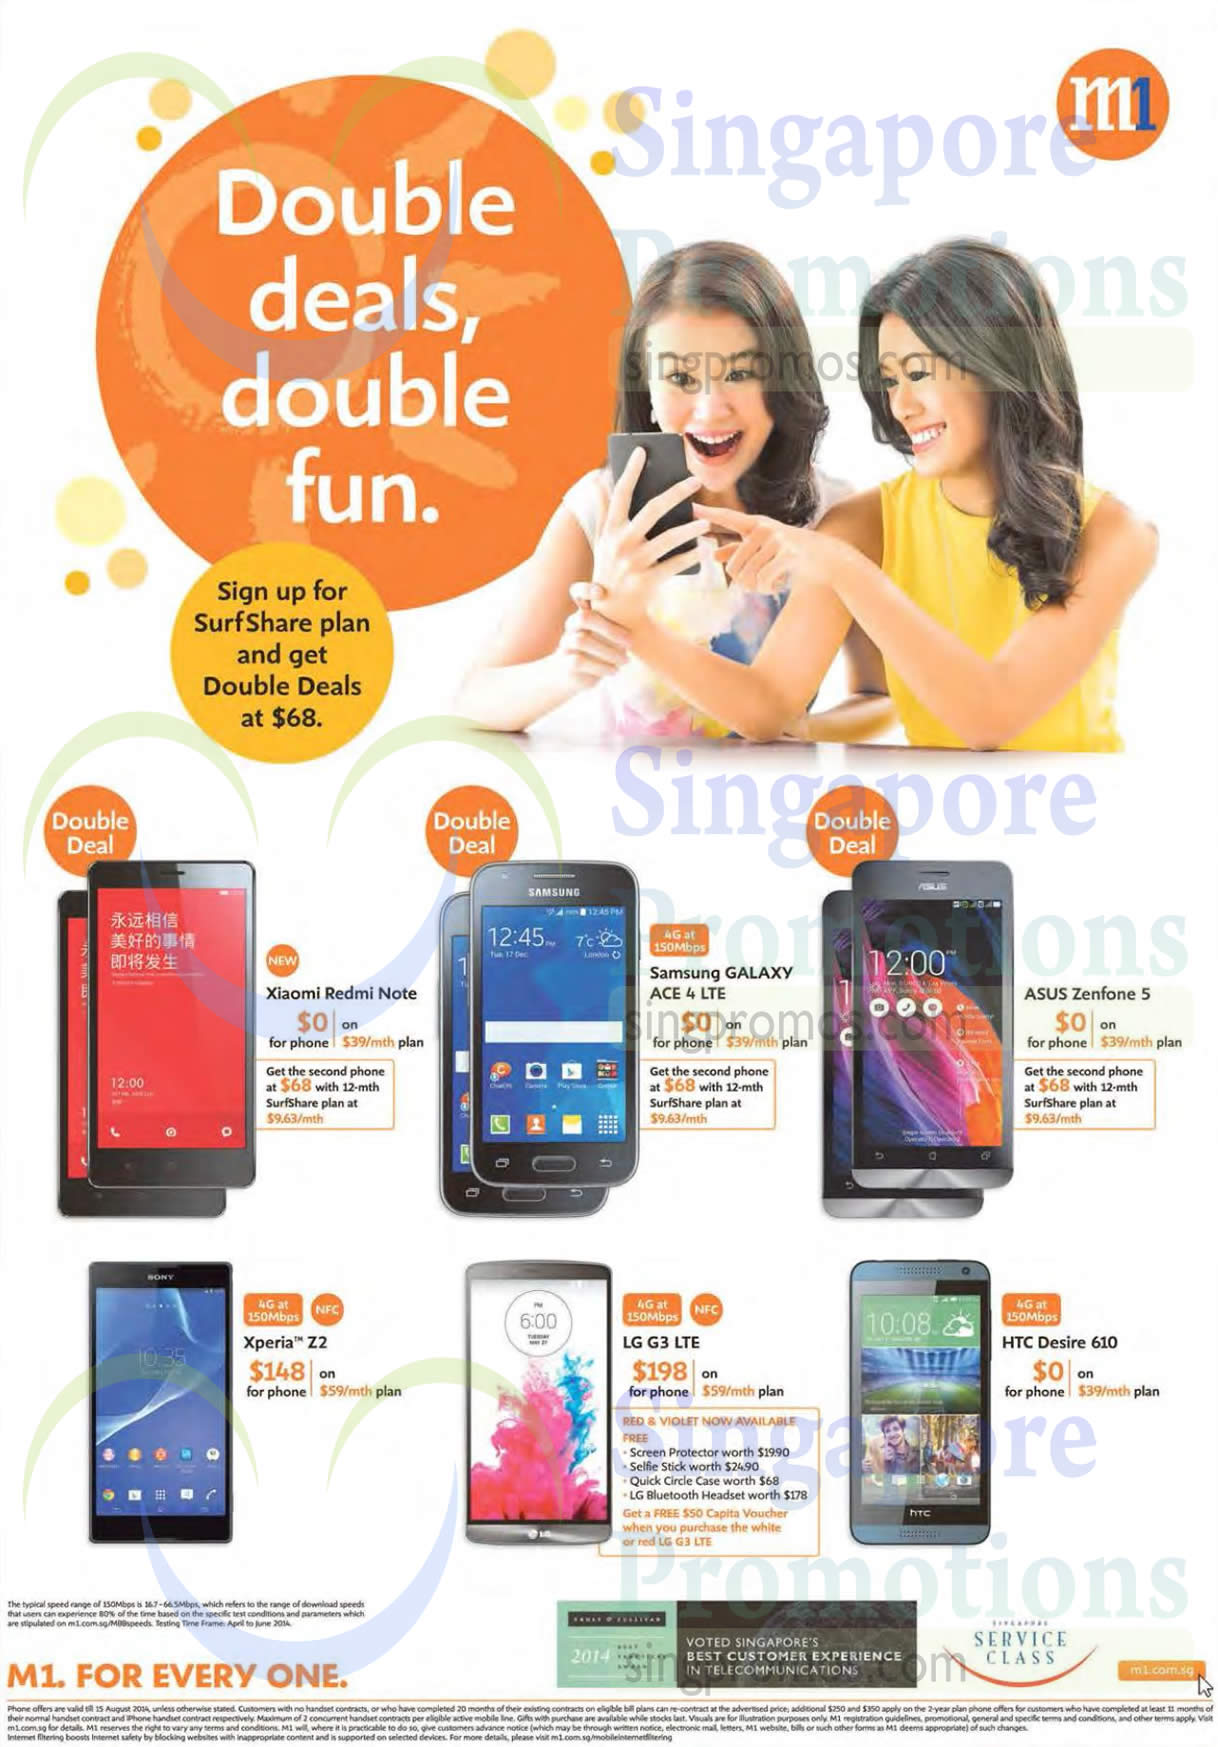 Featured image for M1 Smartphones, Tablets & Home/Mobile Broadband Offers 9 - 15 Aug 2014